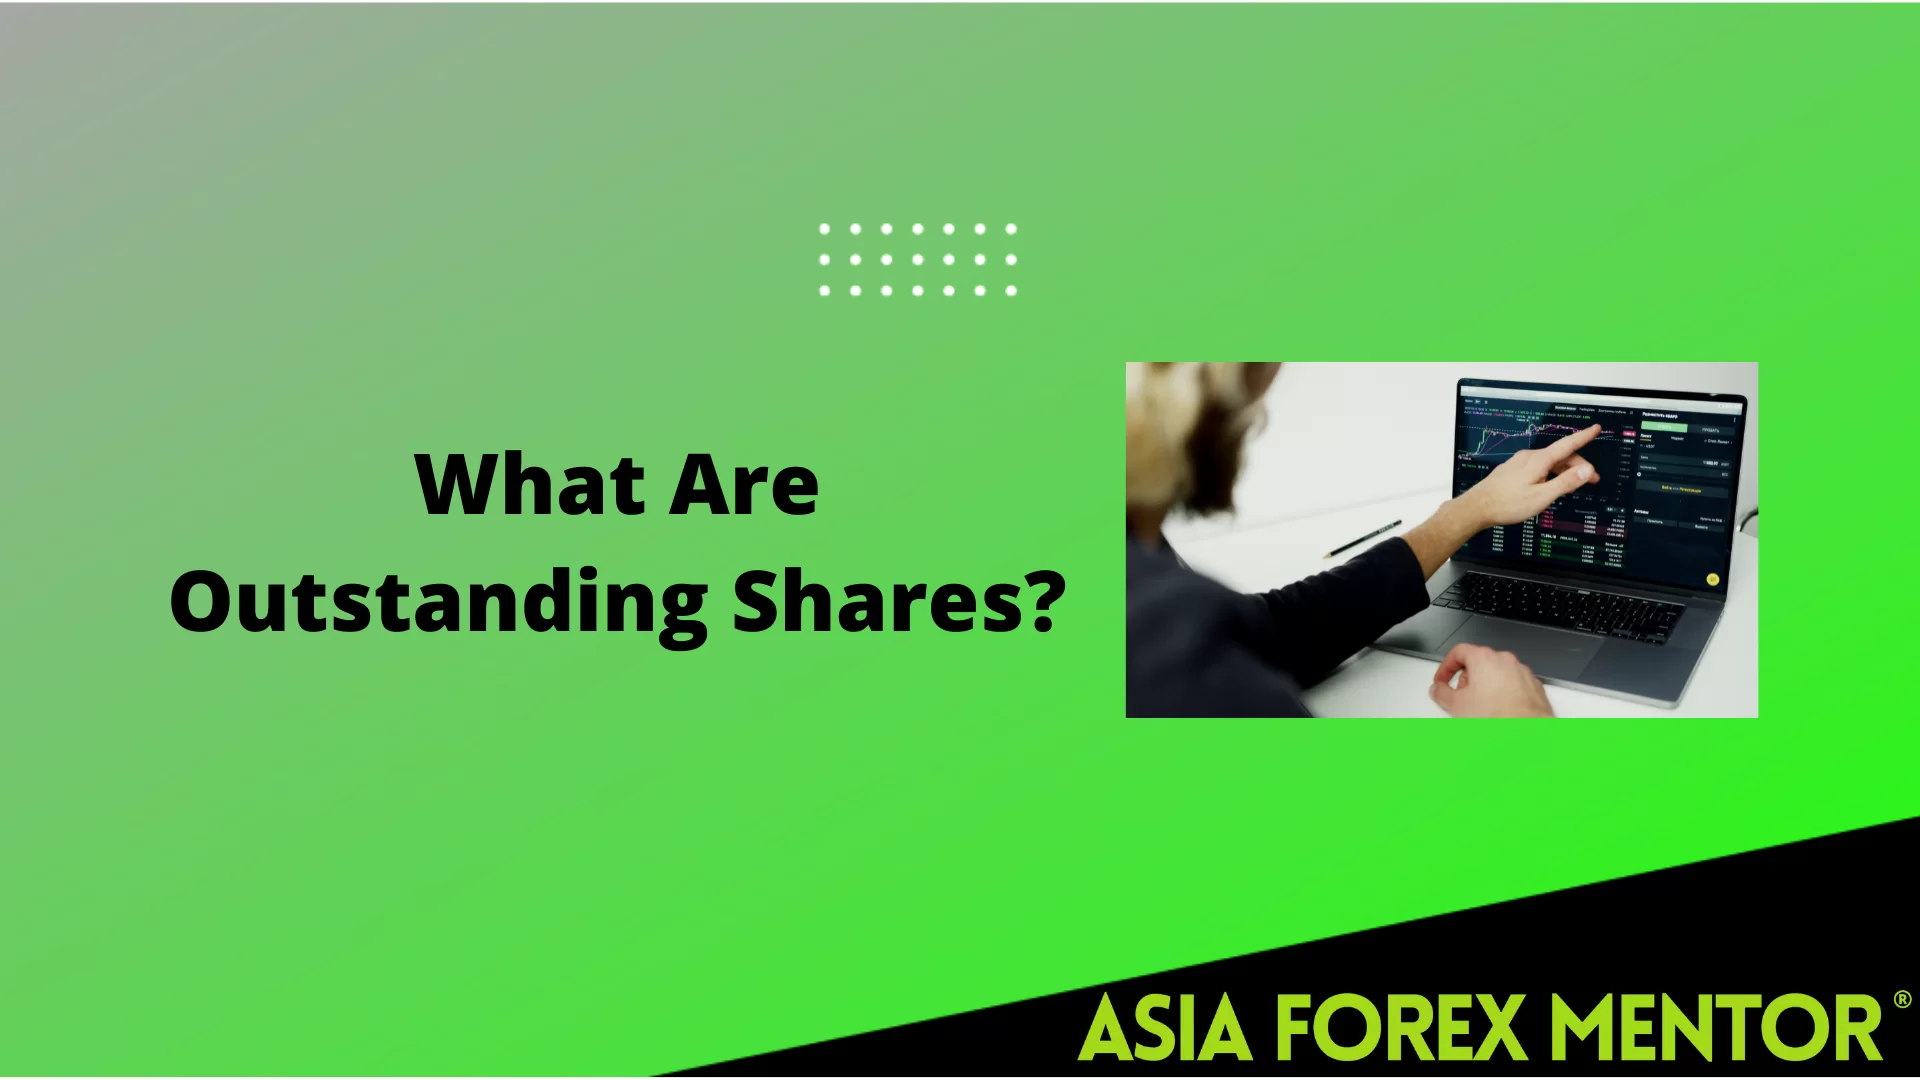 What Are Outstanding Shares